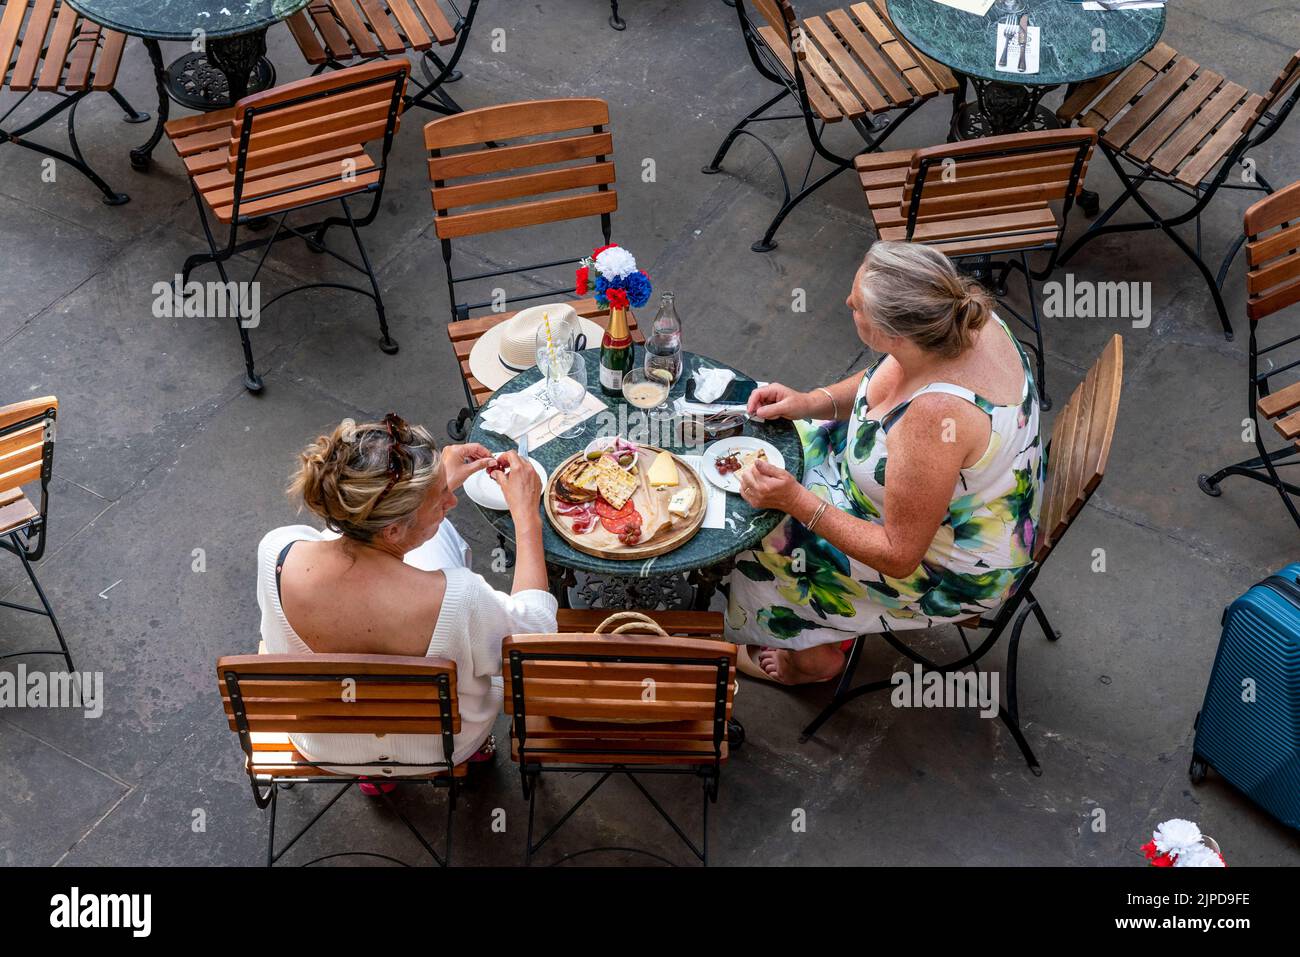 Two Women Having Lunch At A Cafe/Restaurant In The Piazza In Covent Garden, London, UK Stock Photo